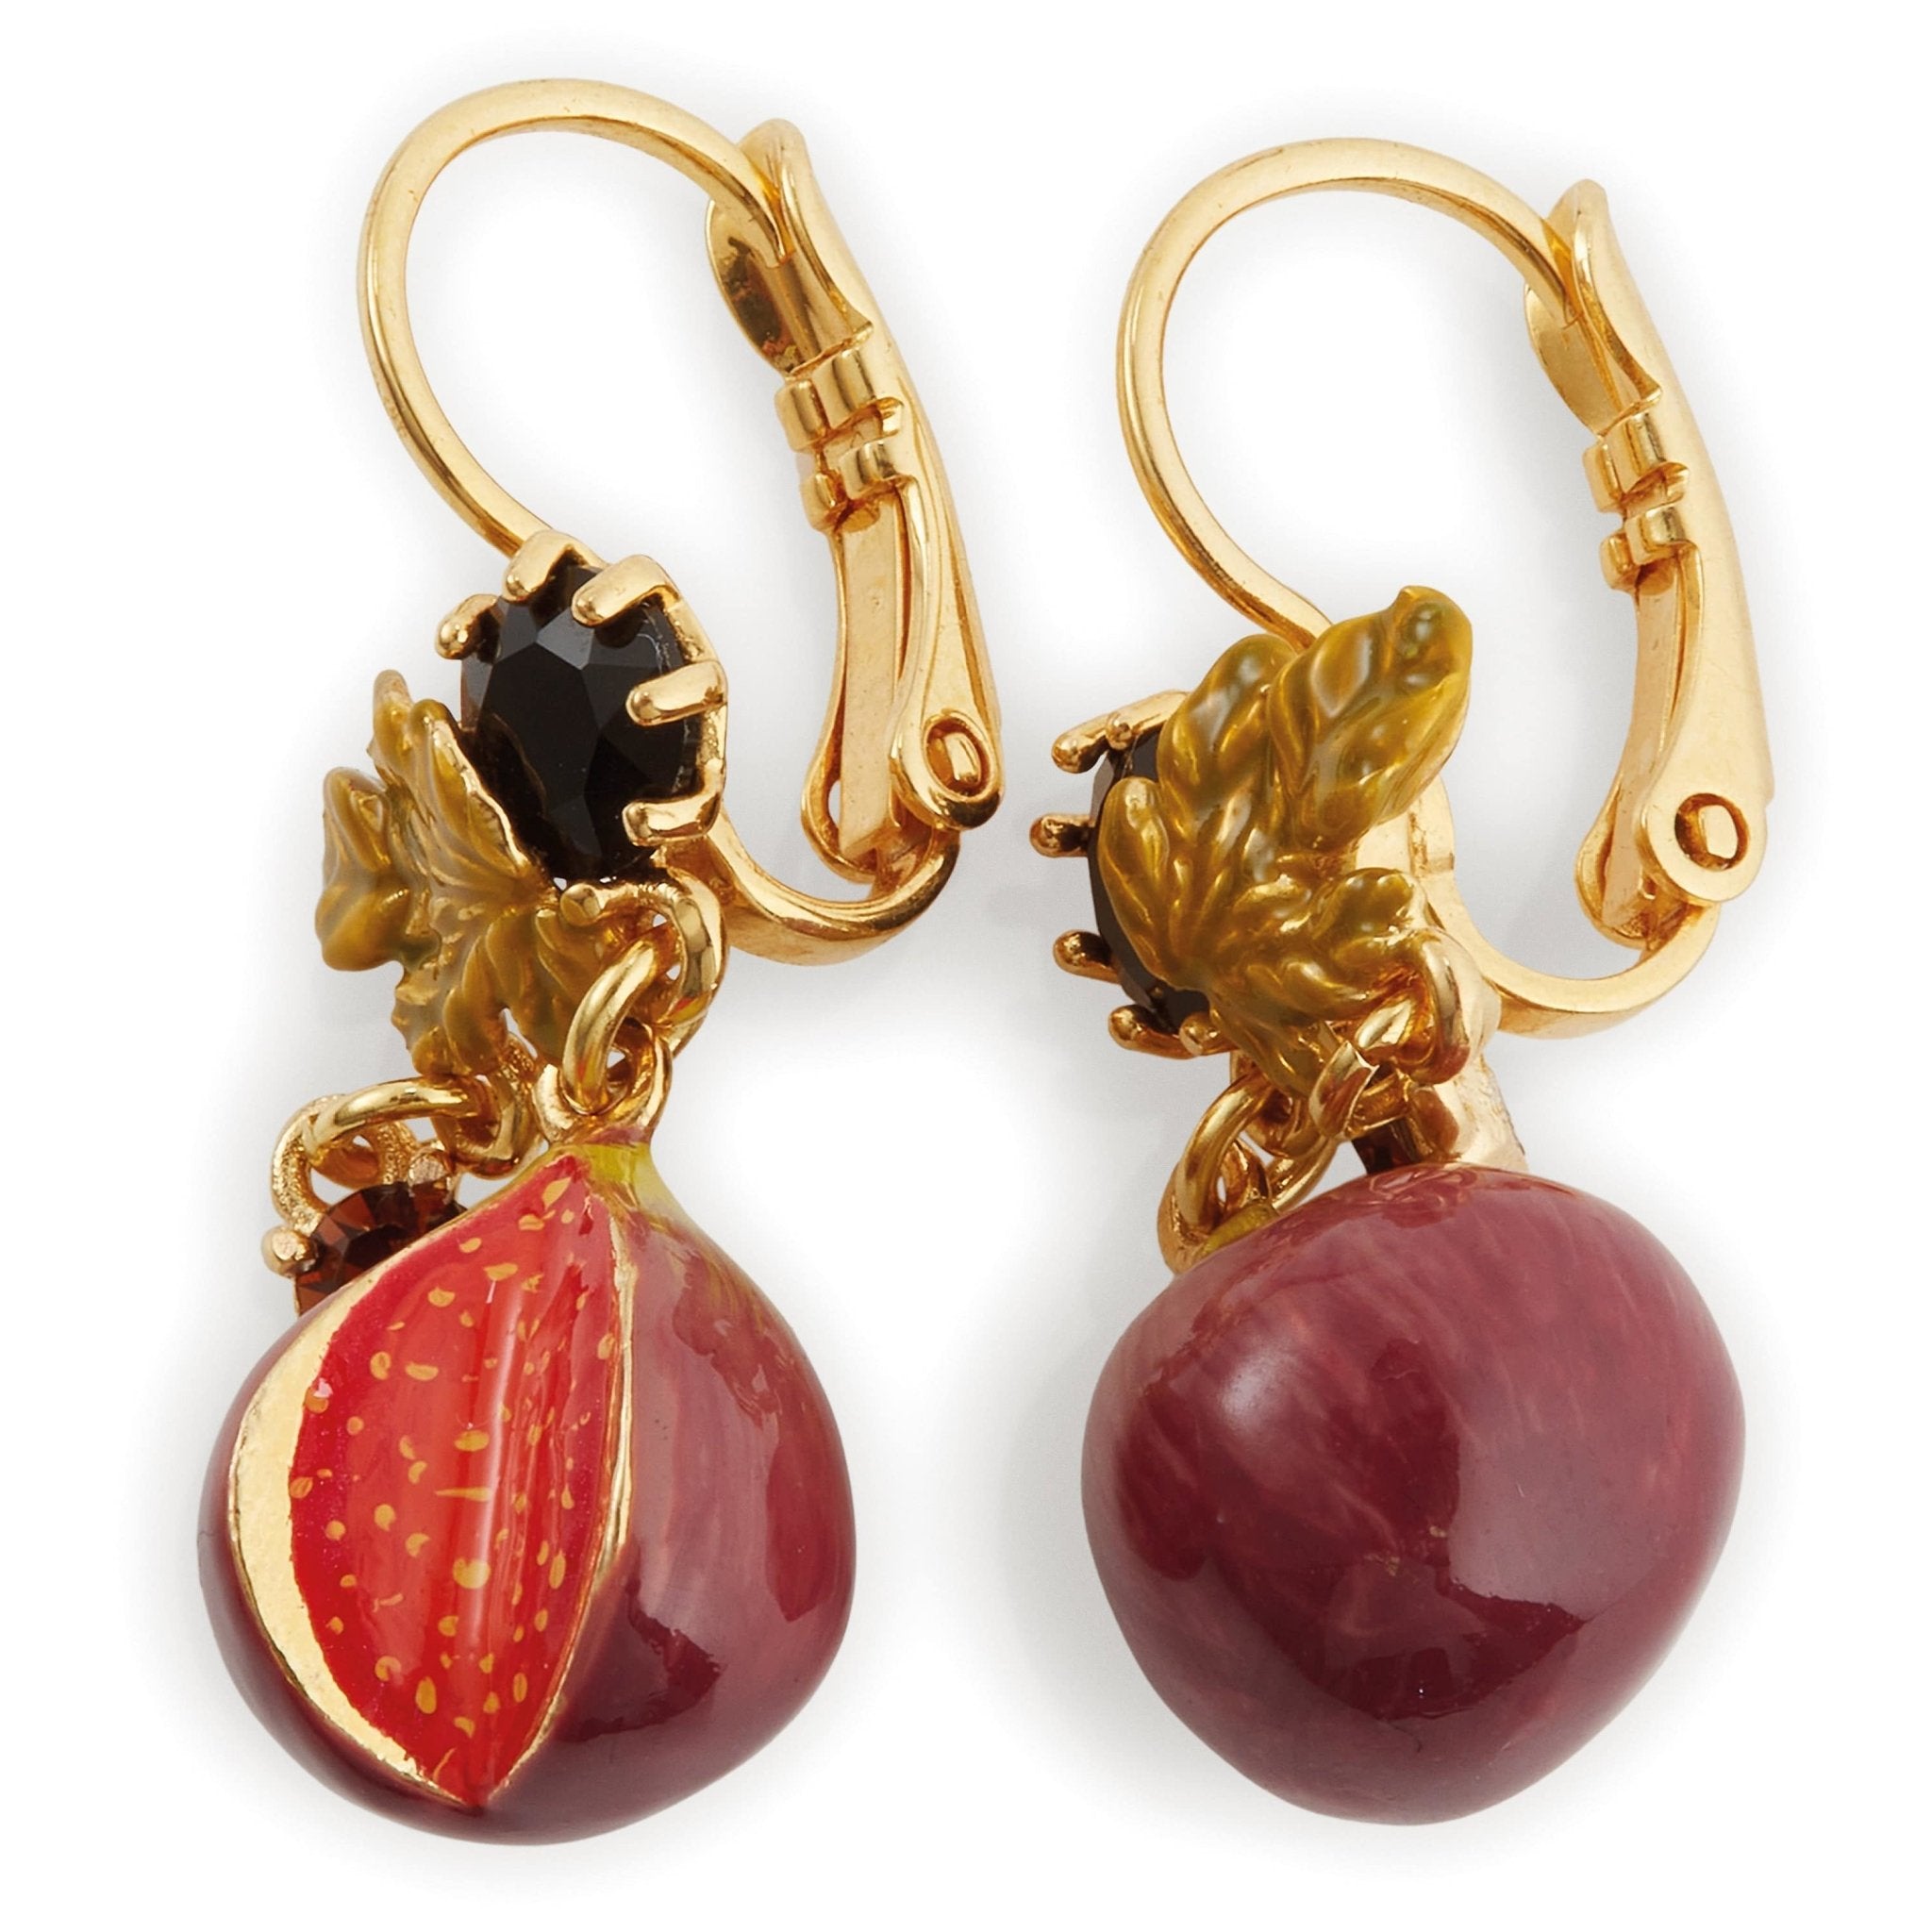 Persephone Earrings - The Gilded Witch